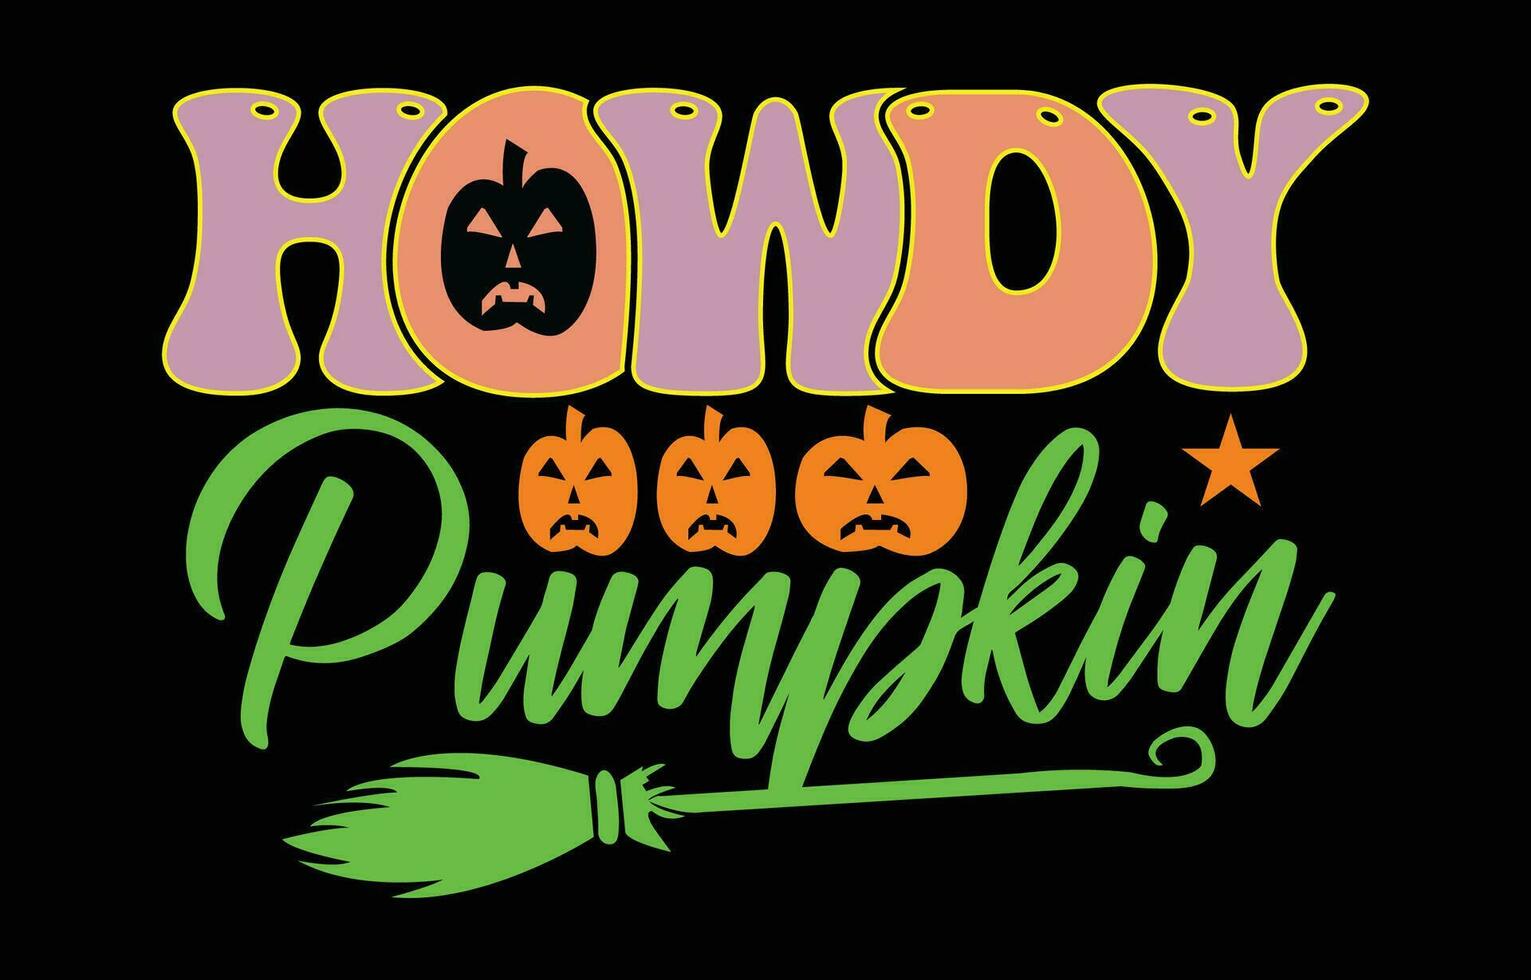 Halloween retro type typography design for t-shirt, cards, frame artwork, bags, mugs, stickers etc vector